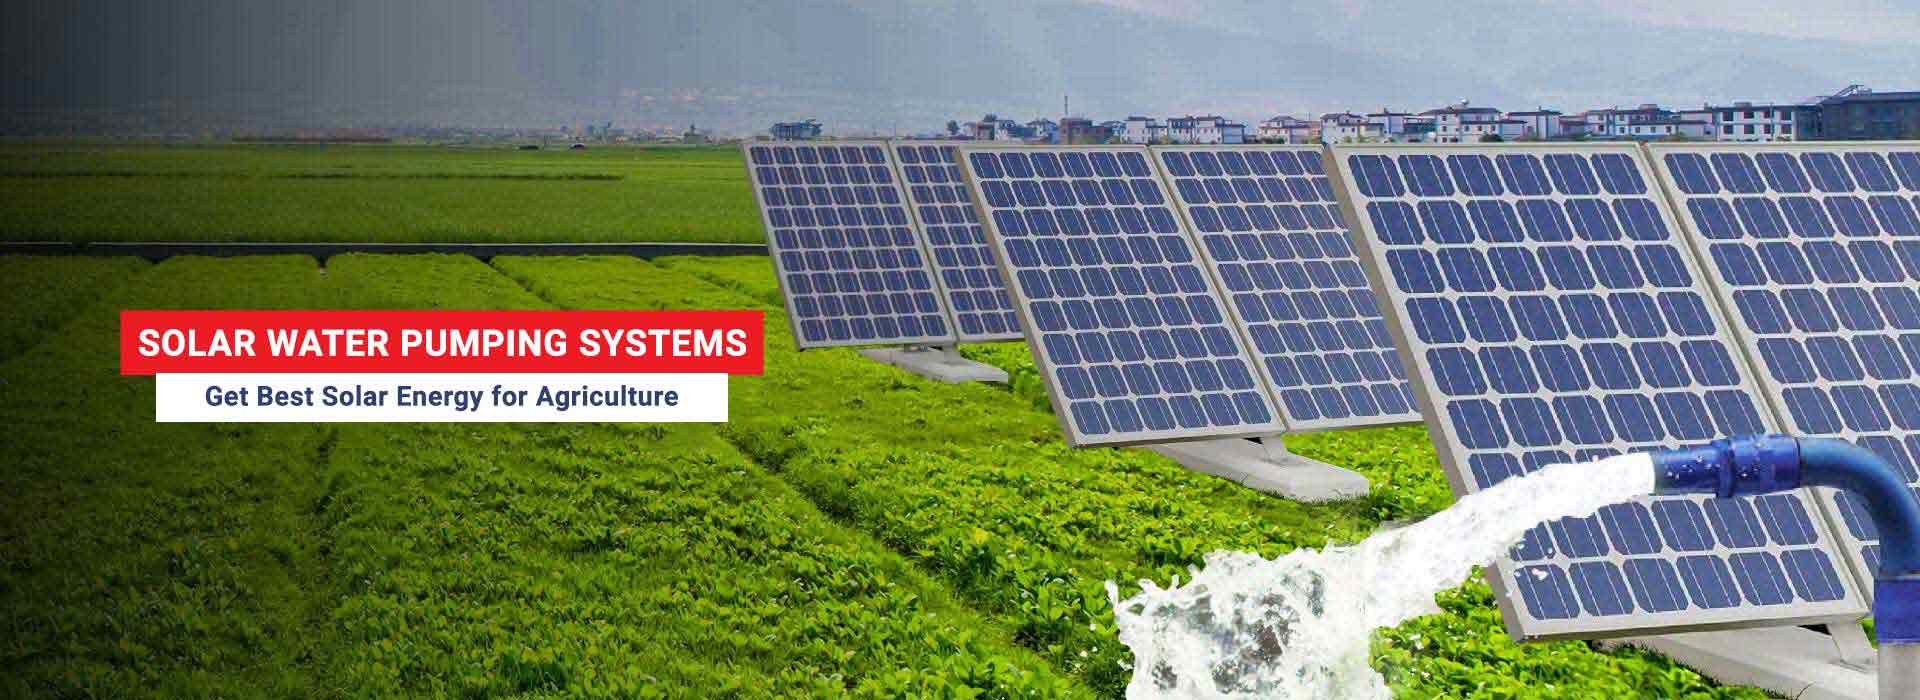 Solar Water Pumping Systems in Gujarat